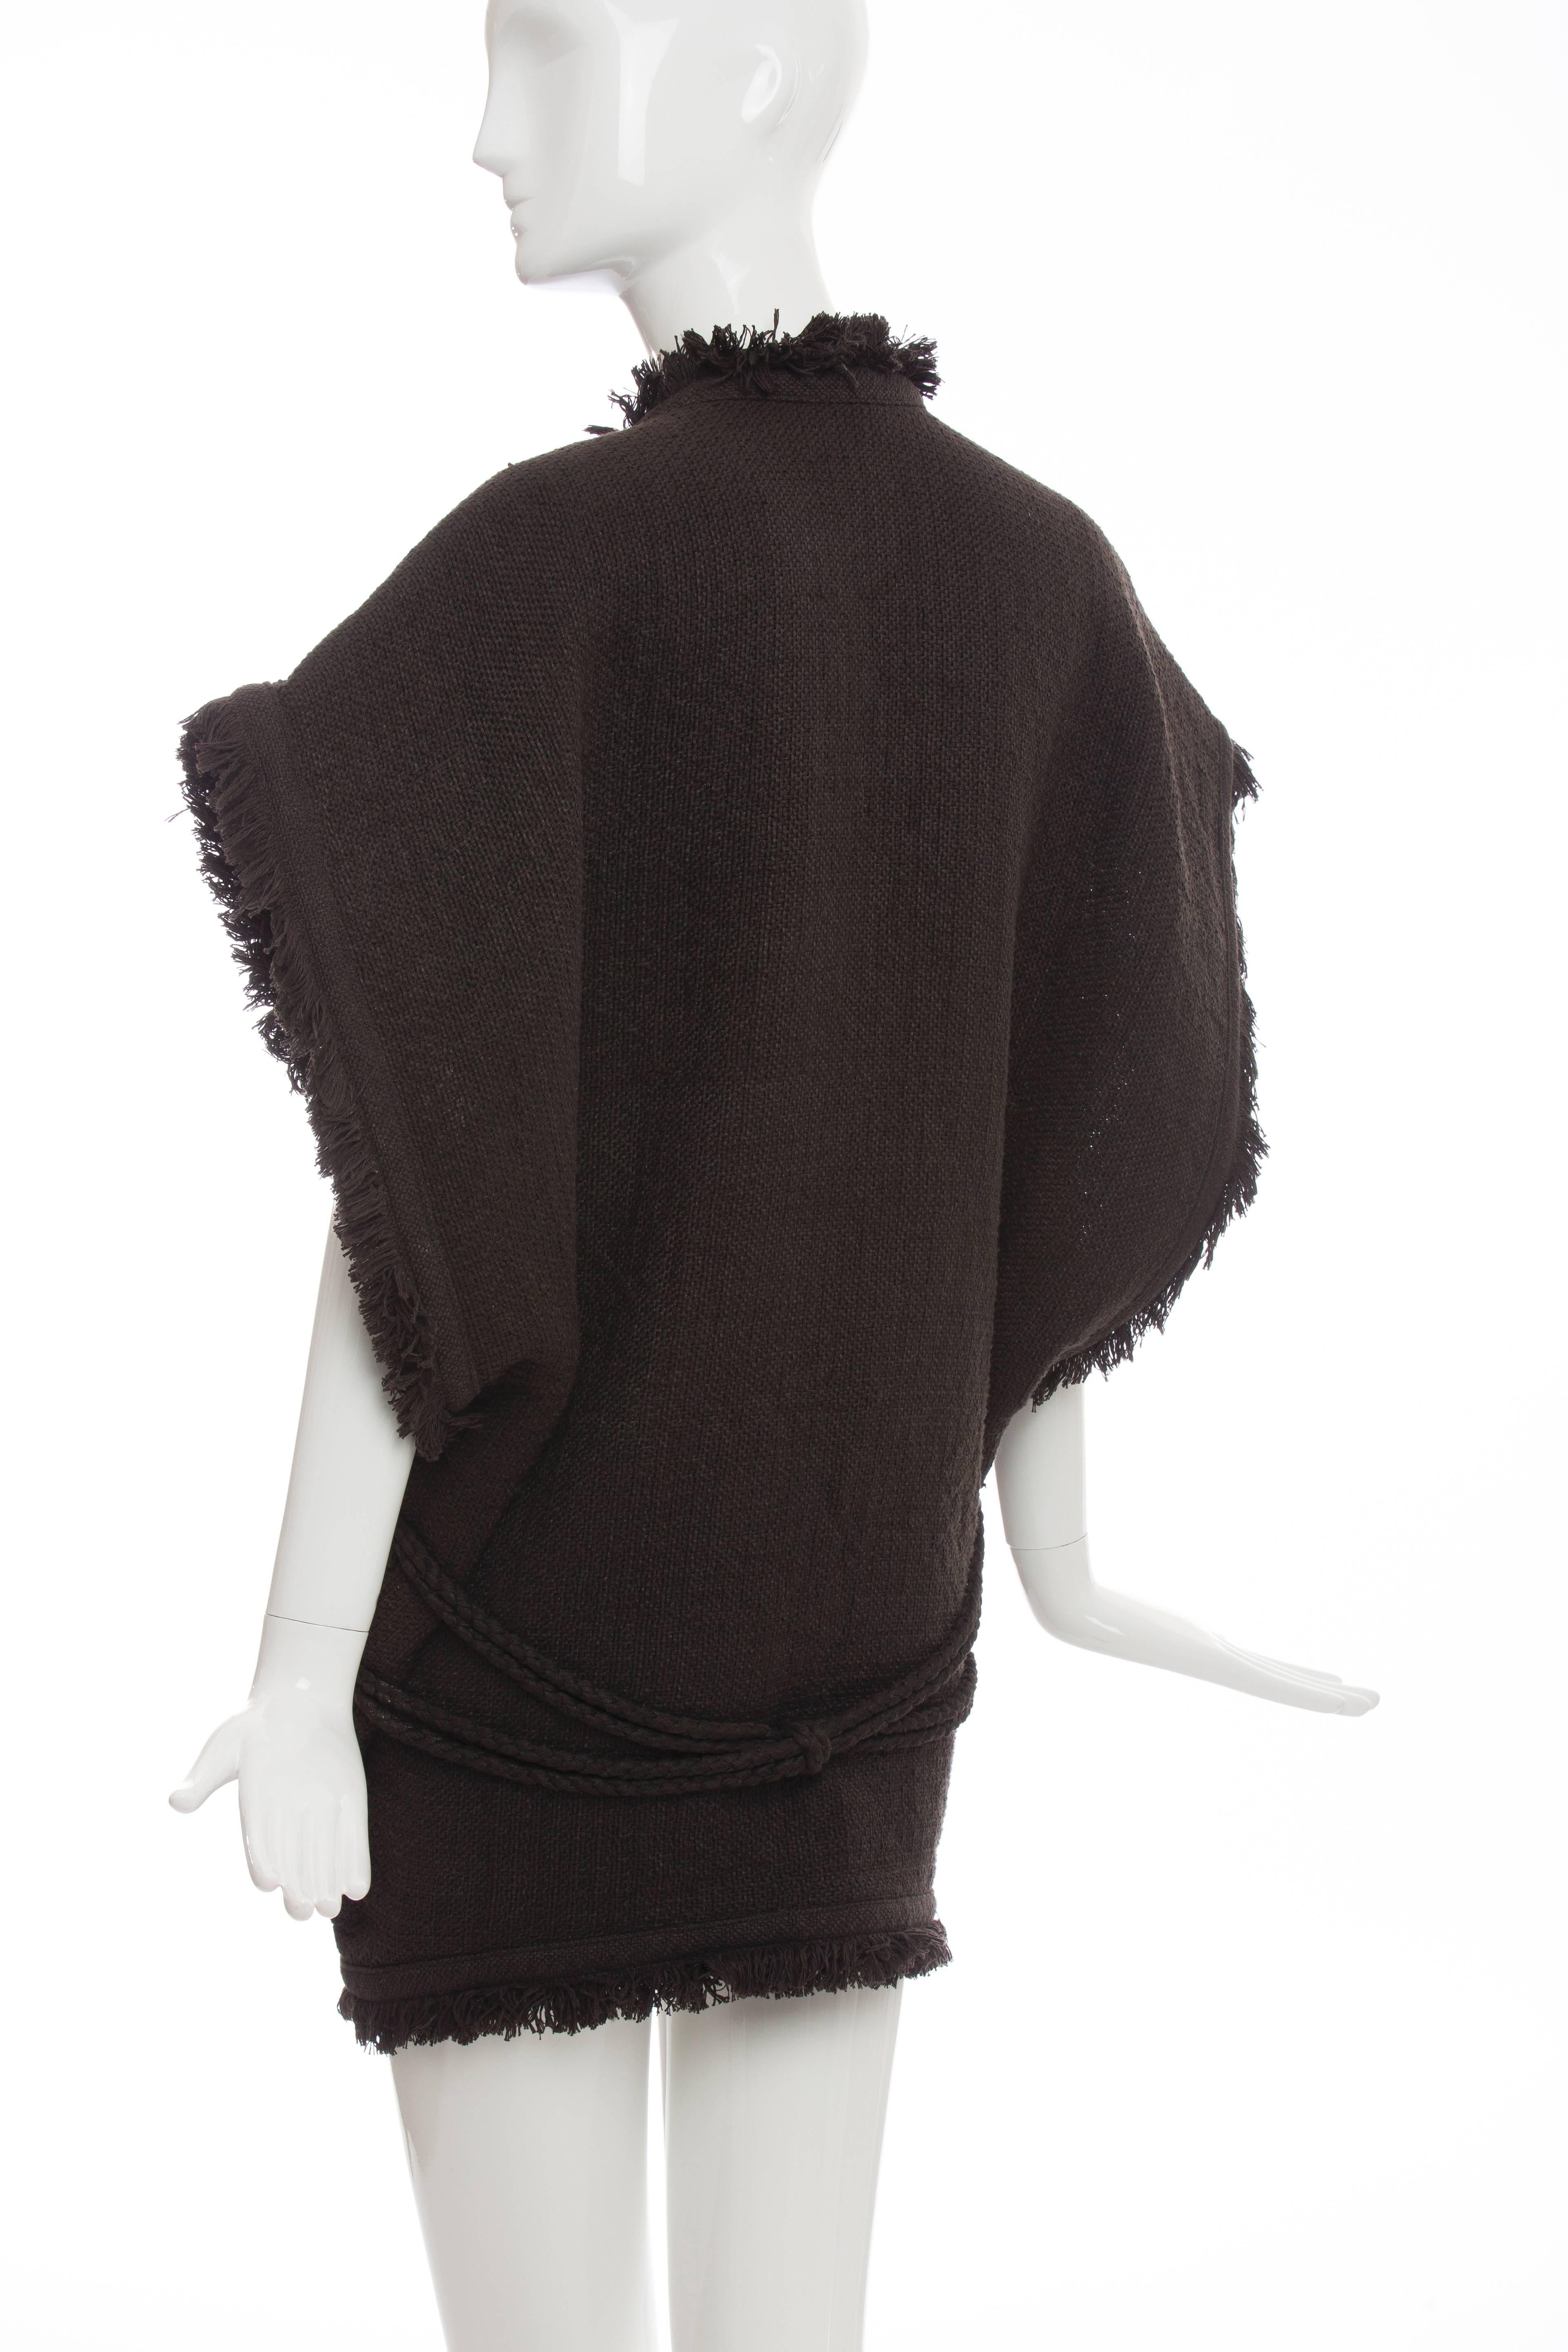 Black Issey Miyake Grey Fringed Woven Vest Featured In The Irving Penn Book, Fall 1984 For Sale